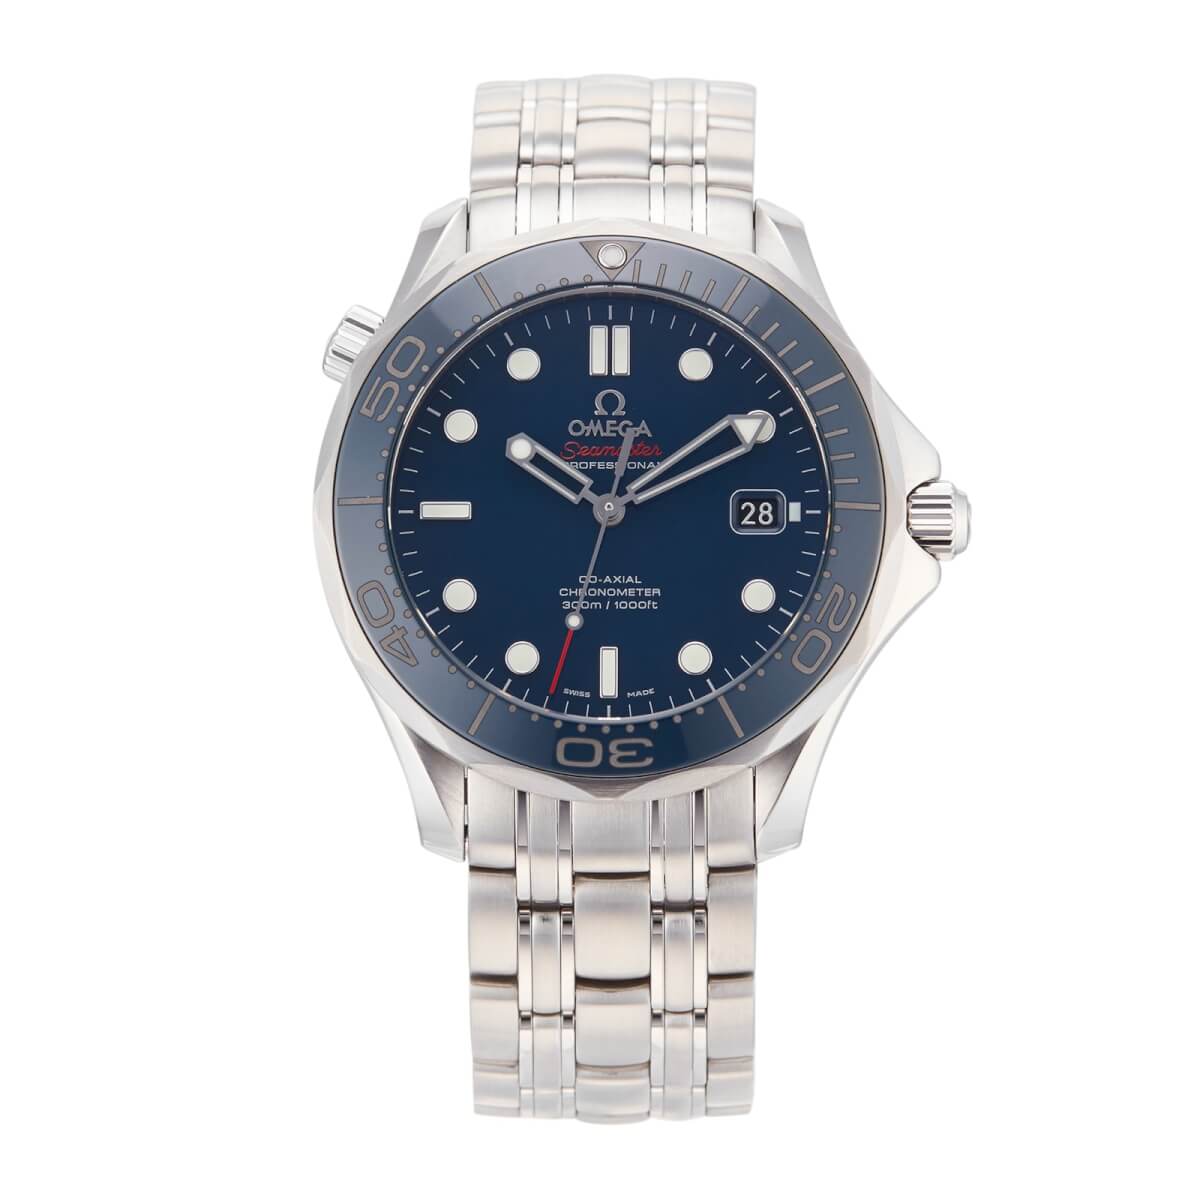 Pre-Owned OMEGA Seamaster Diver 300M Mens Watch 212.30.41.20.03.001